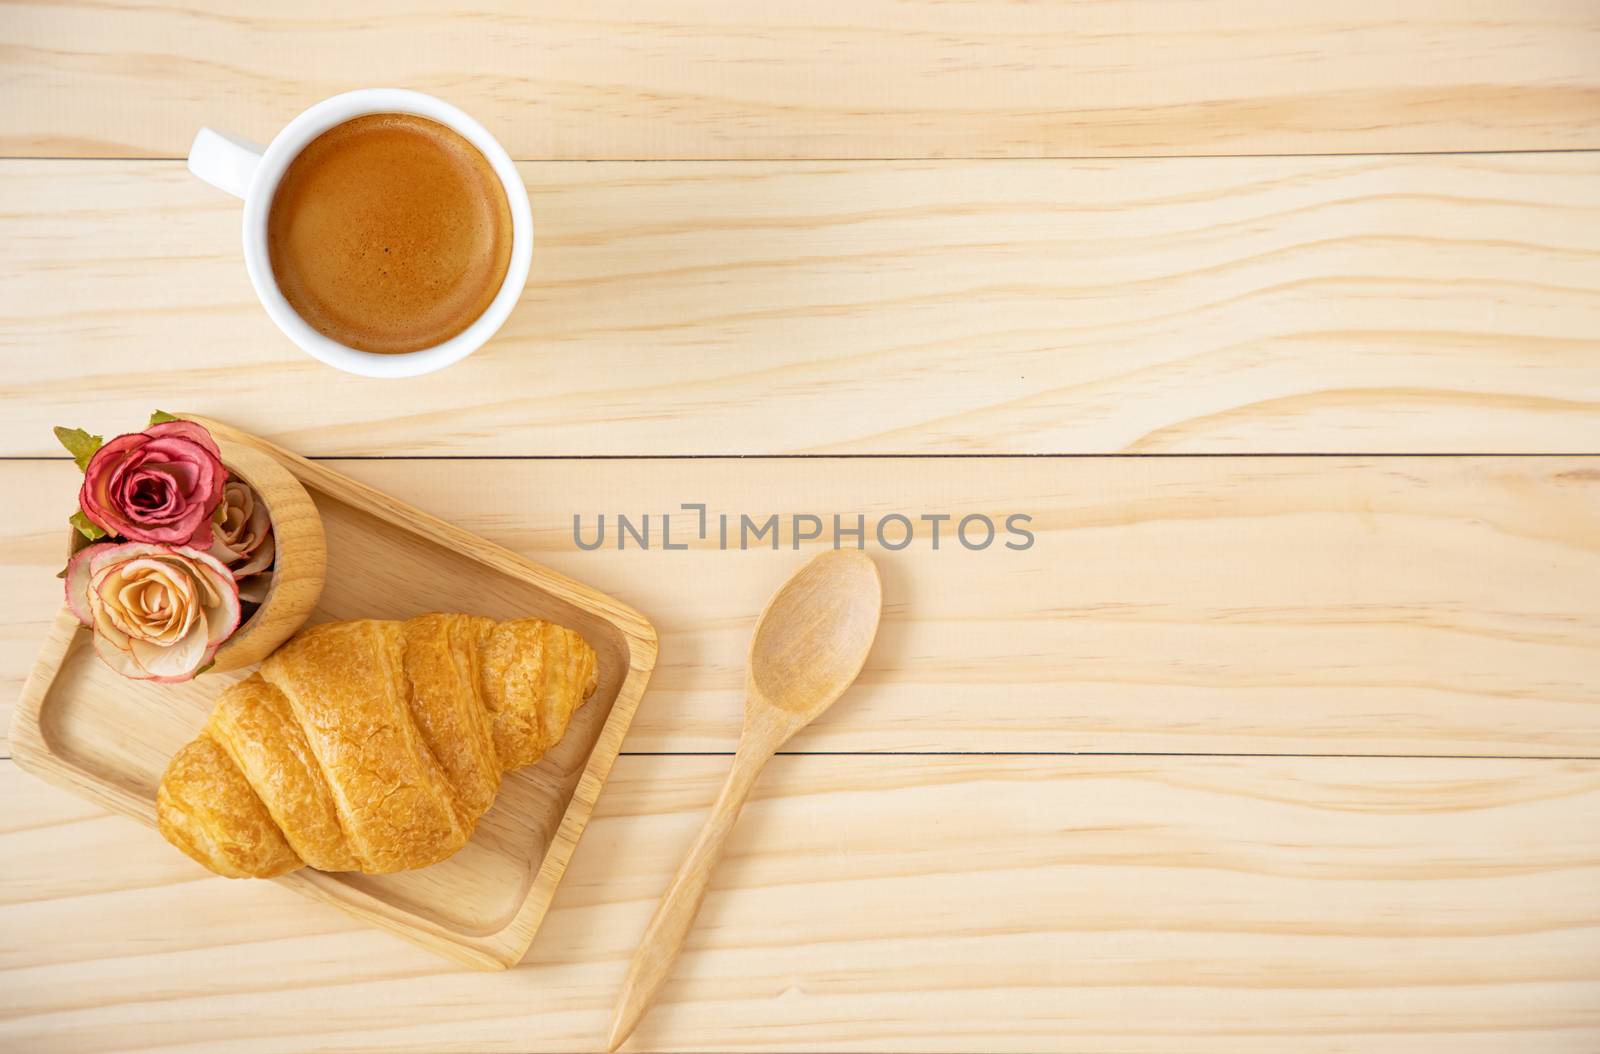 Croissant and a cup of coffee by Nawoot